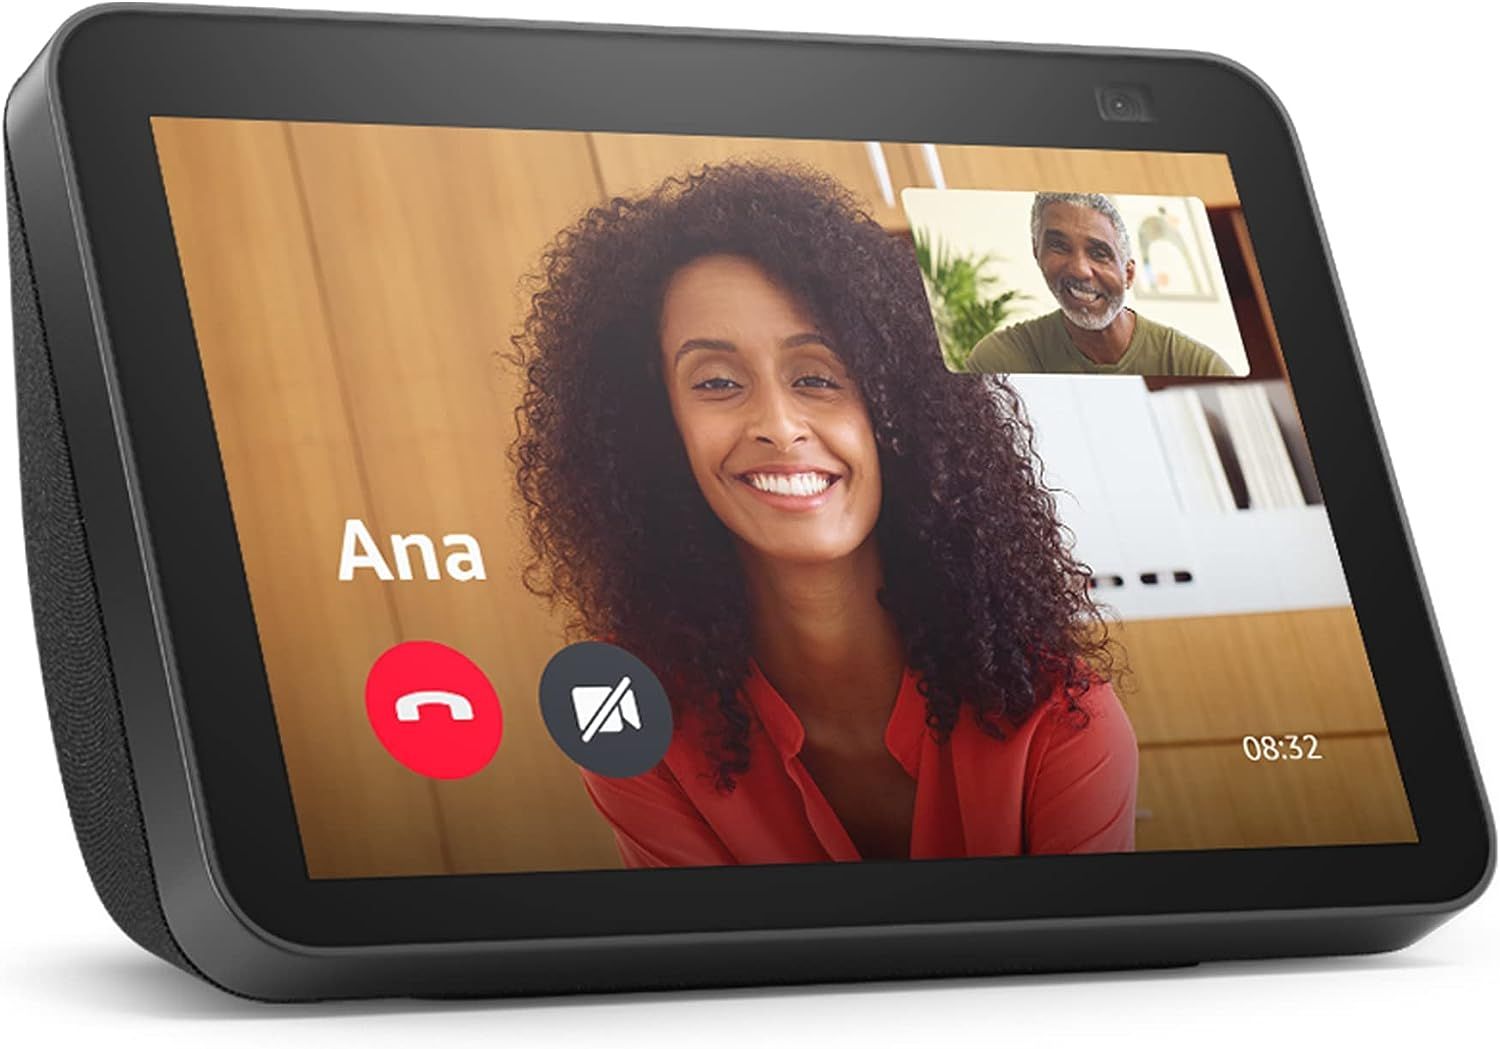 The Amazon Echo Show 8 being used for a video call